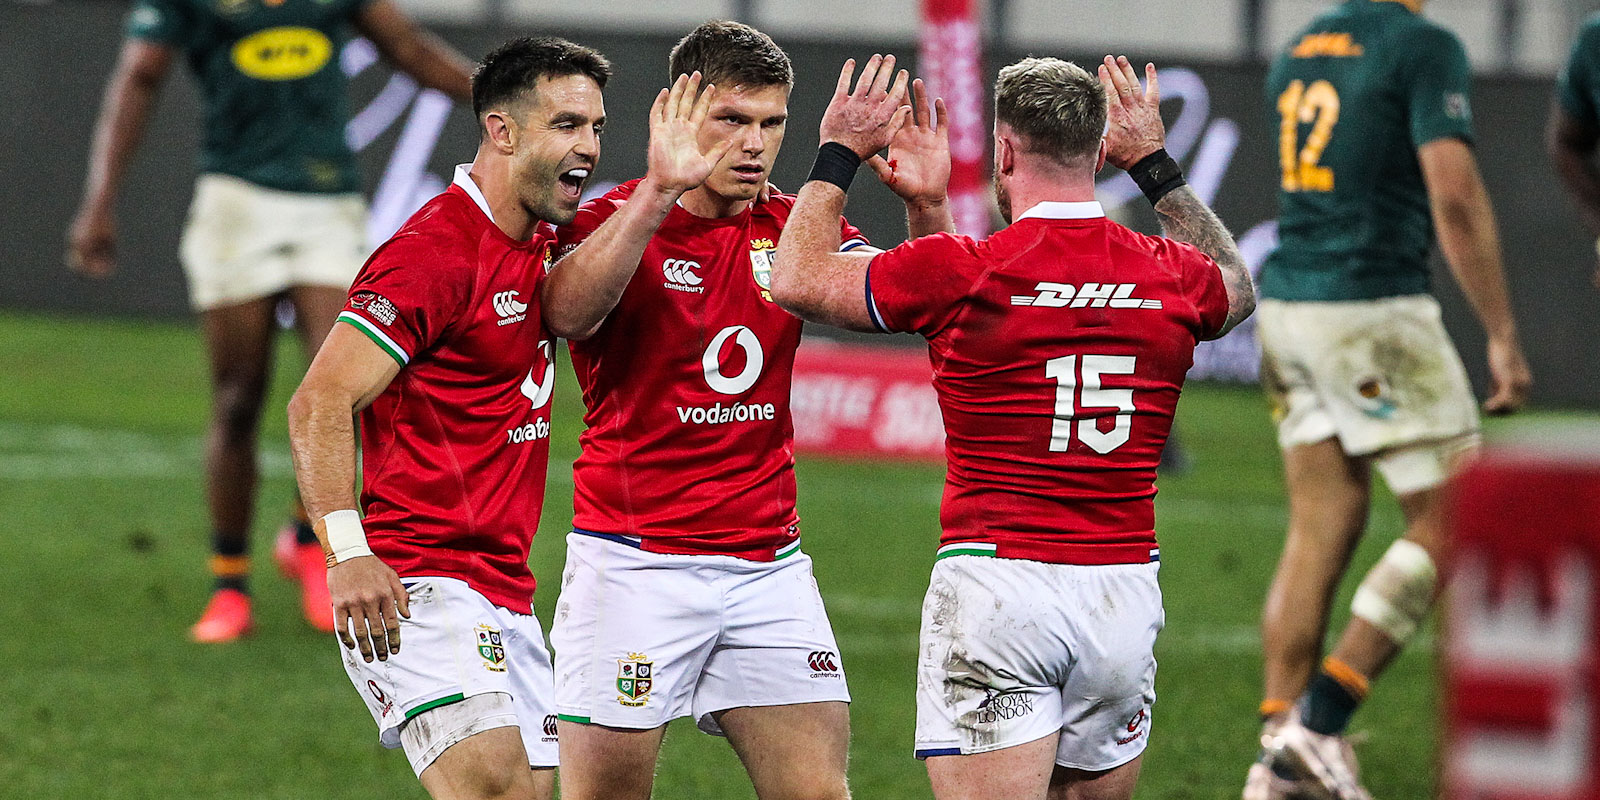 Lions celebrations after Owen Farrell's penalty goal pushed them ahead by five points.